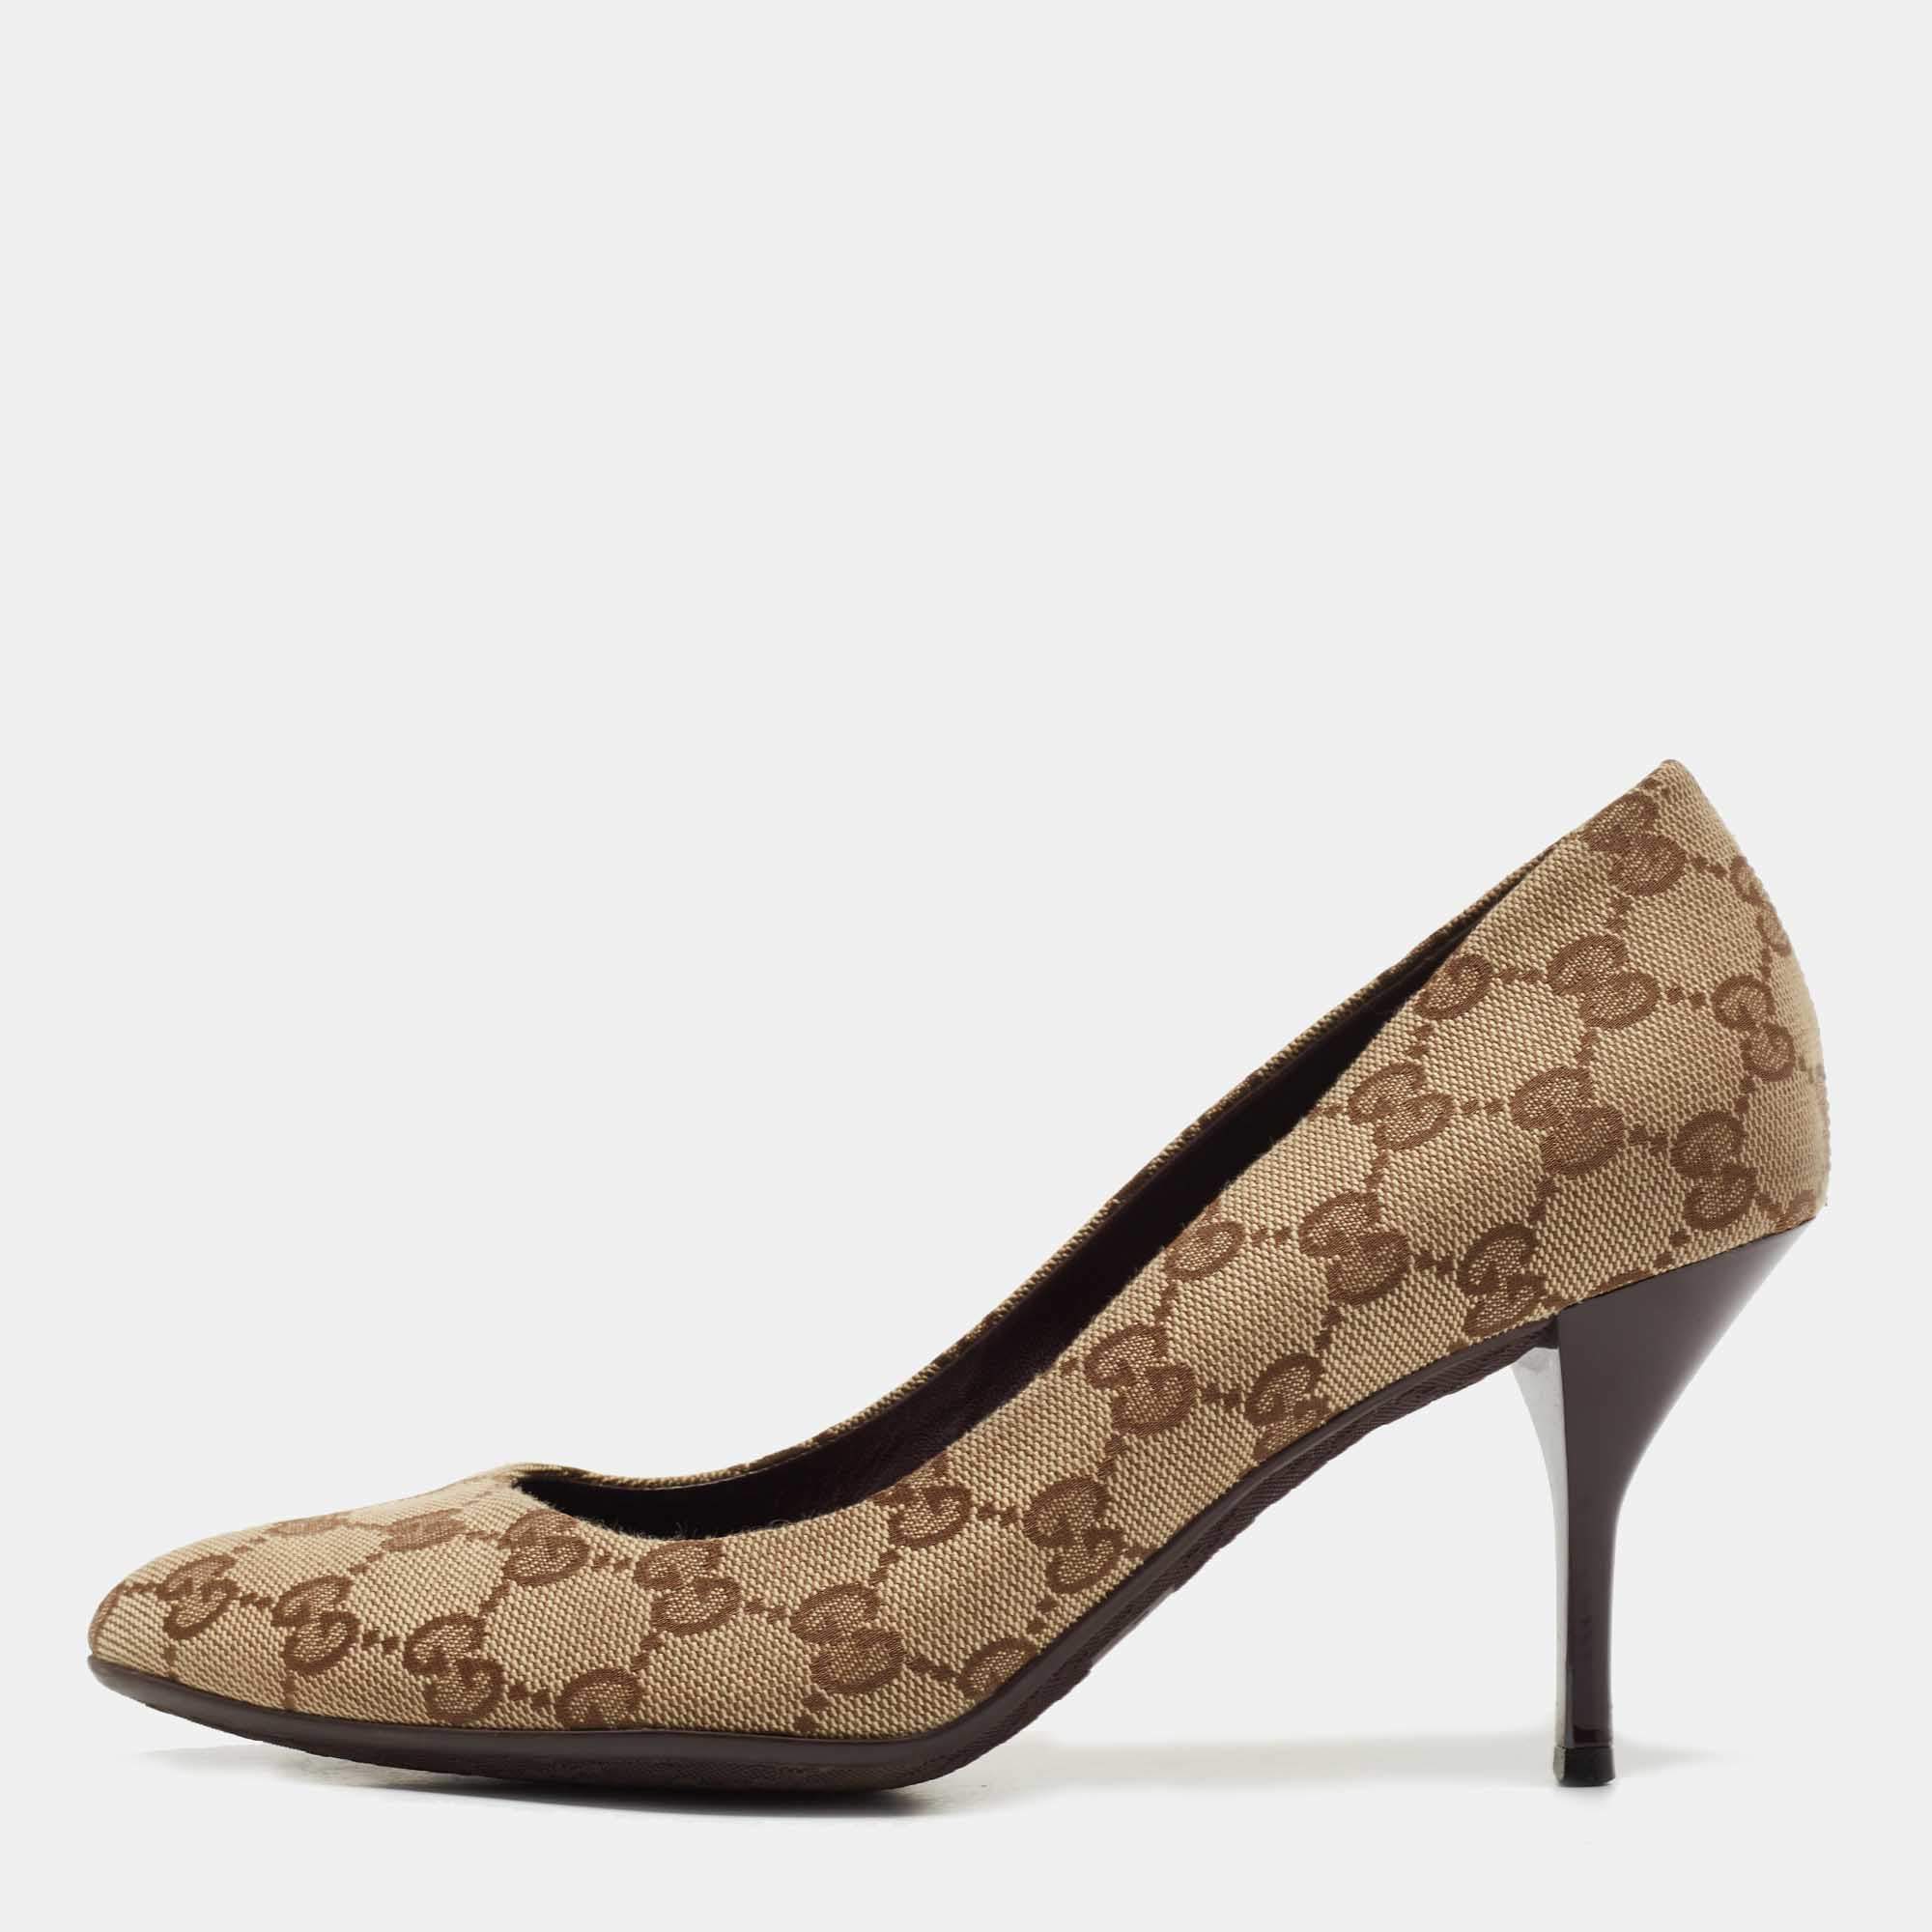 Gucci Brown GG Canvas Pointed Toe Pumps Size 38